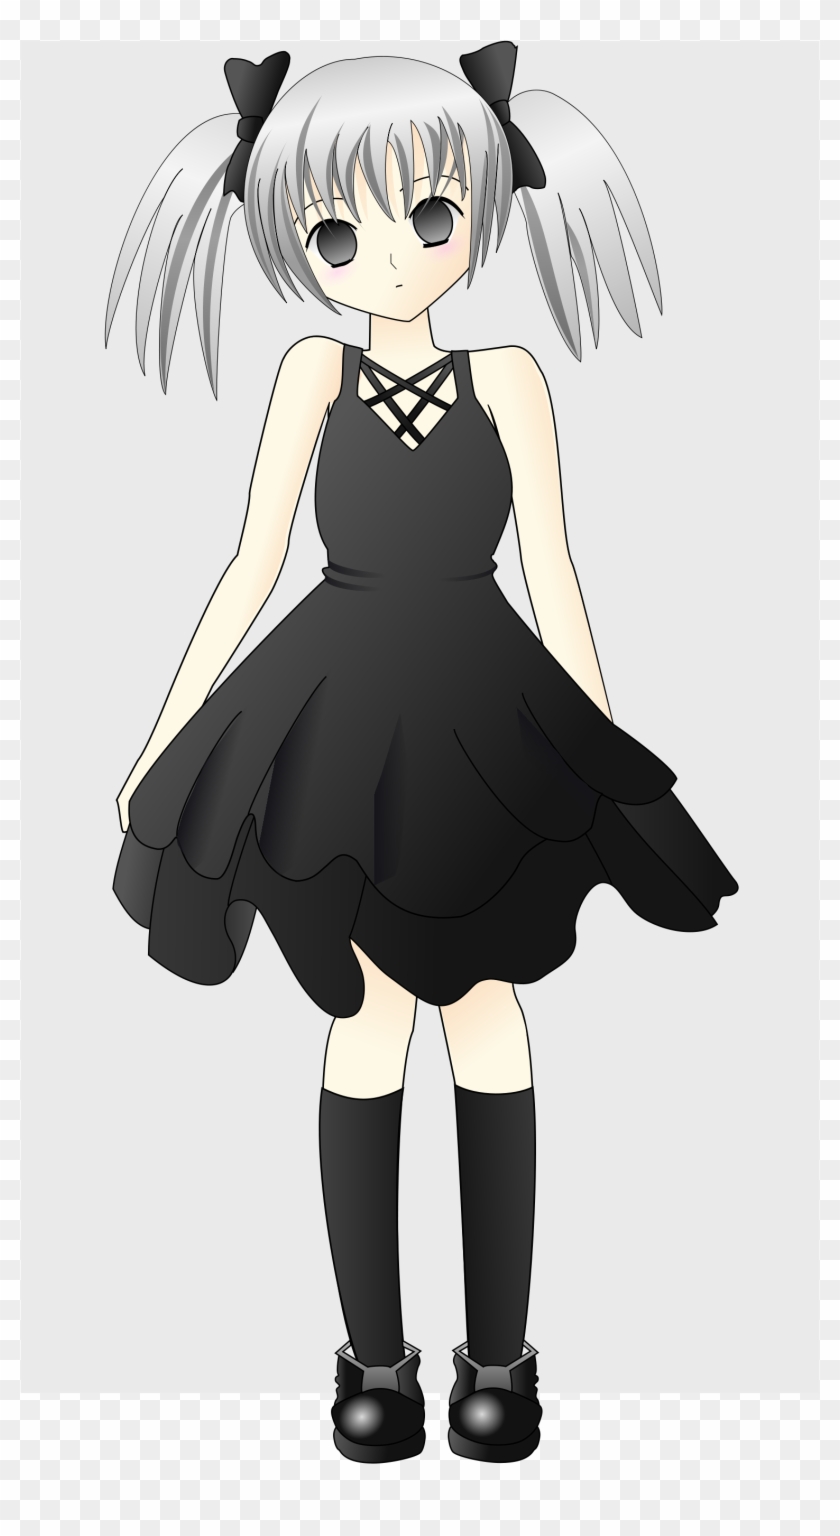 Open - Little Anime Girl With Gray Hair Clipart #216887